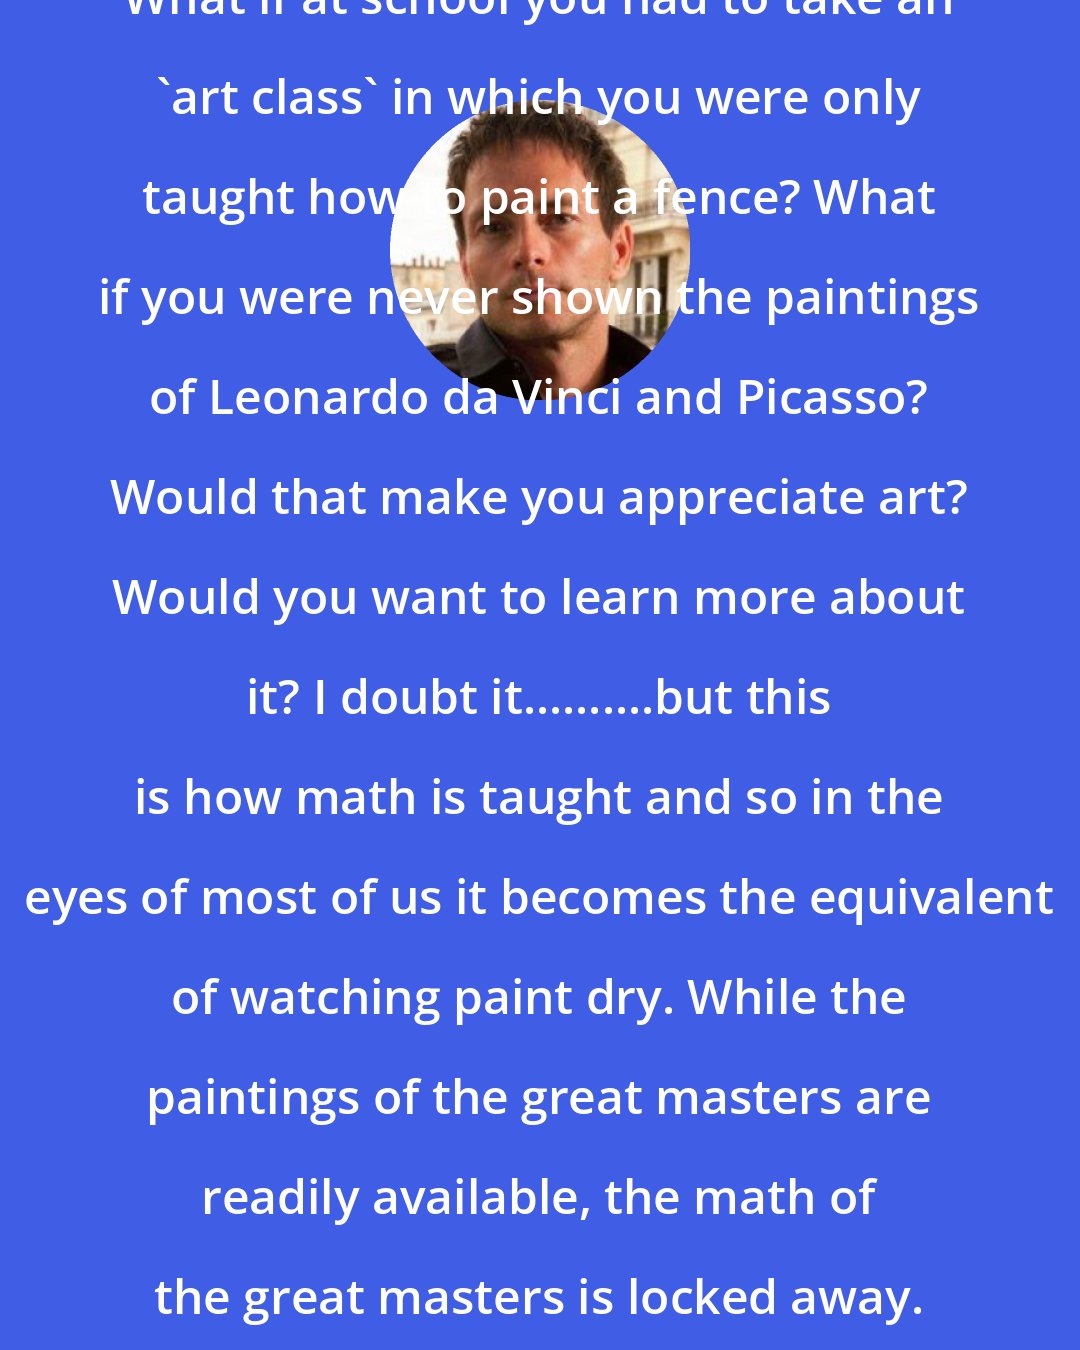 Edward Frenkel: What if at school you had to take an 'art class' in which you were only taught how to paint a fence? What if you were never shown the paintings of Leonardo da Vinci and Picasso? Would that make you appreciate art? Would you want to learn more about it? I doubt it..........but this is how math is taught and so in the eyes of most of us it becomes the equivalent of watching paint dry. While the paintings of the great masters are readily available, the math of the great masters is locked away.